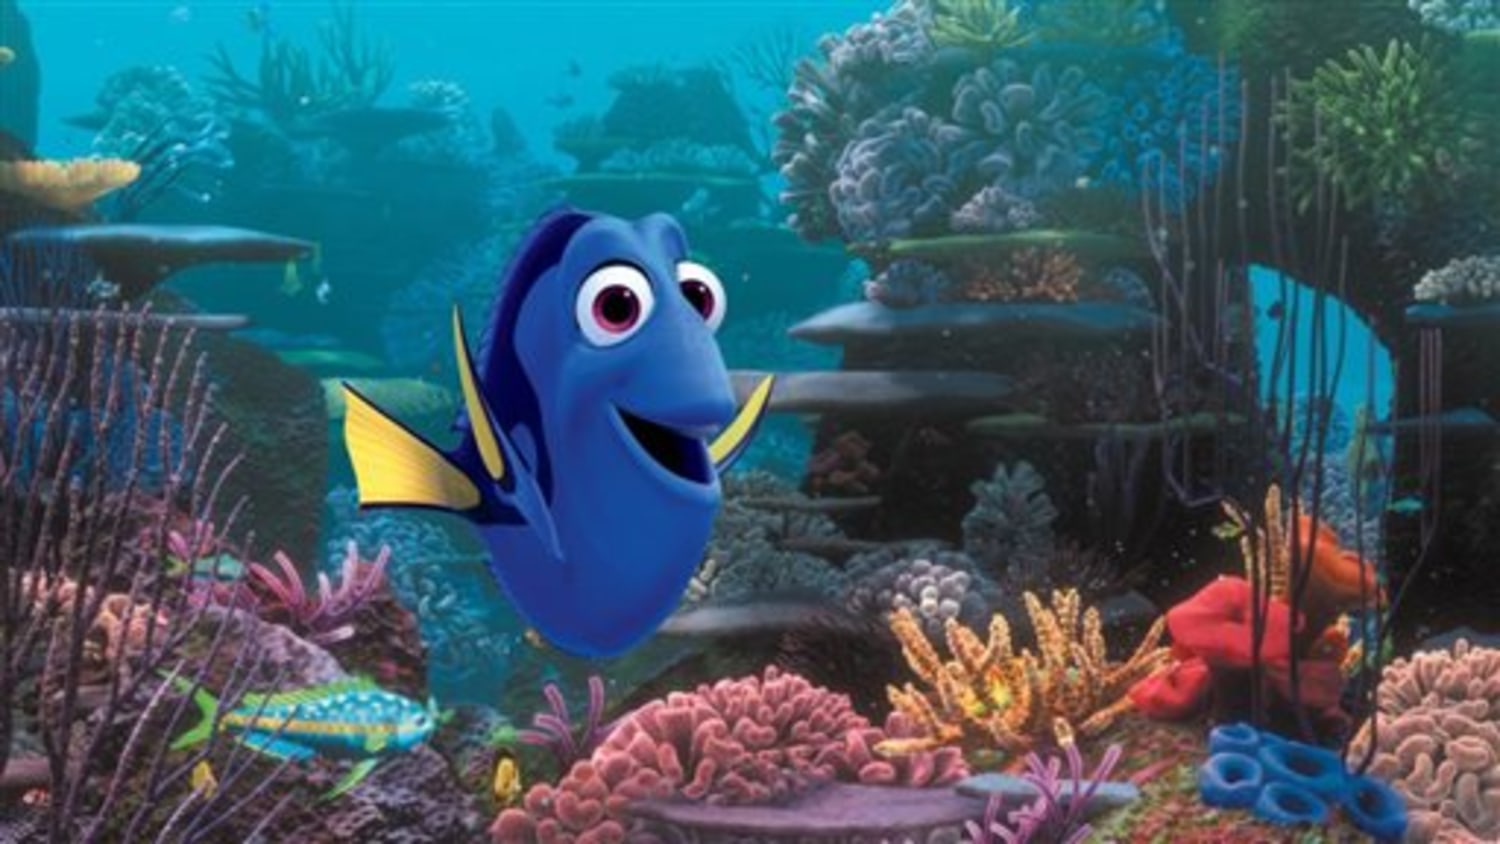 finding dory free online movie